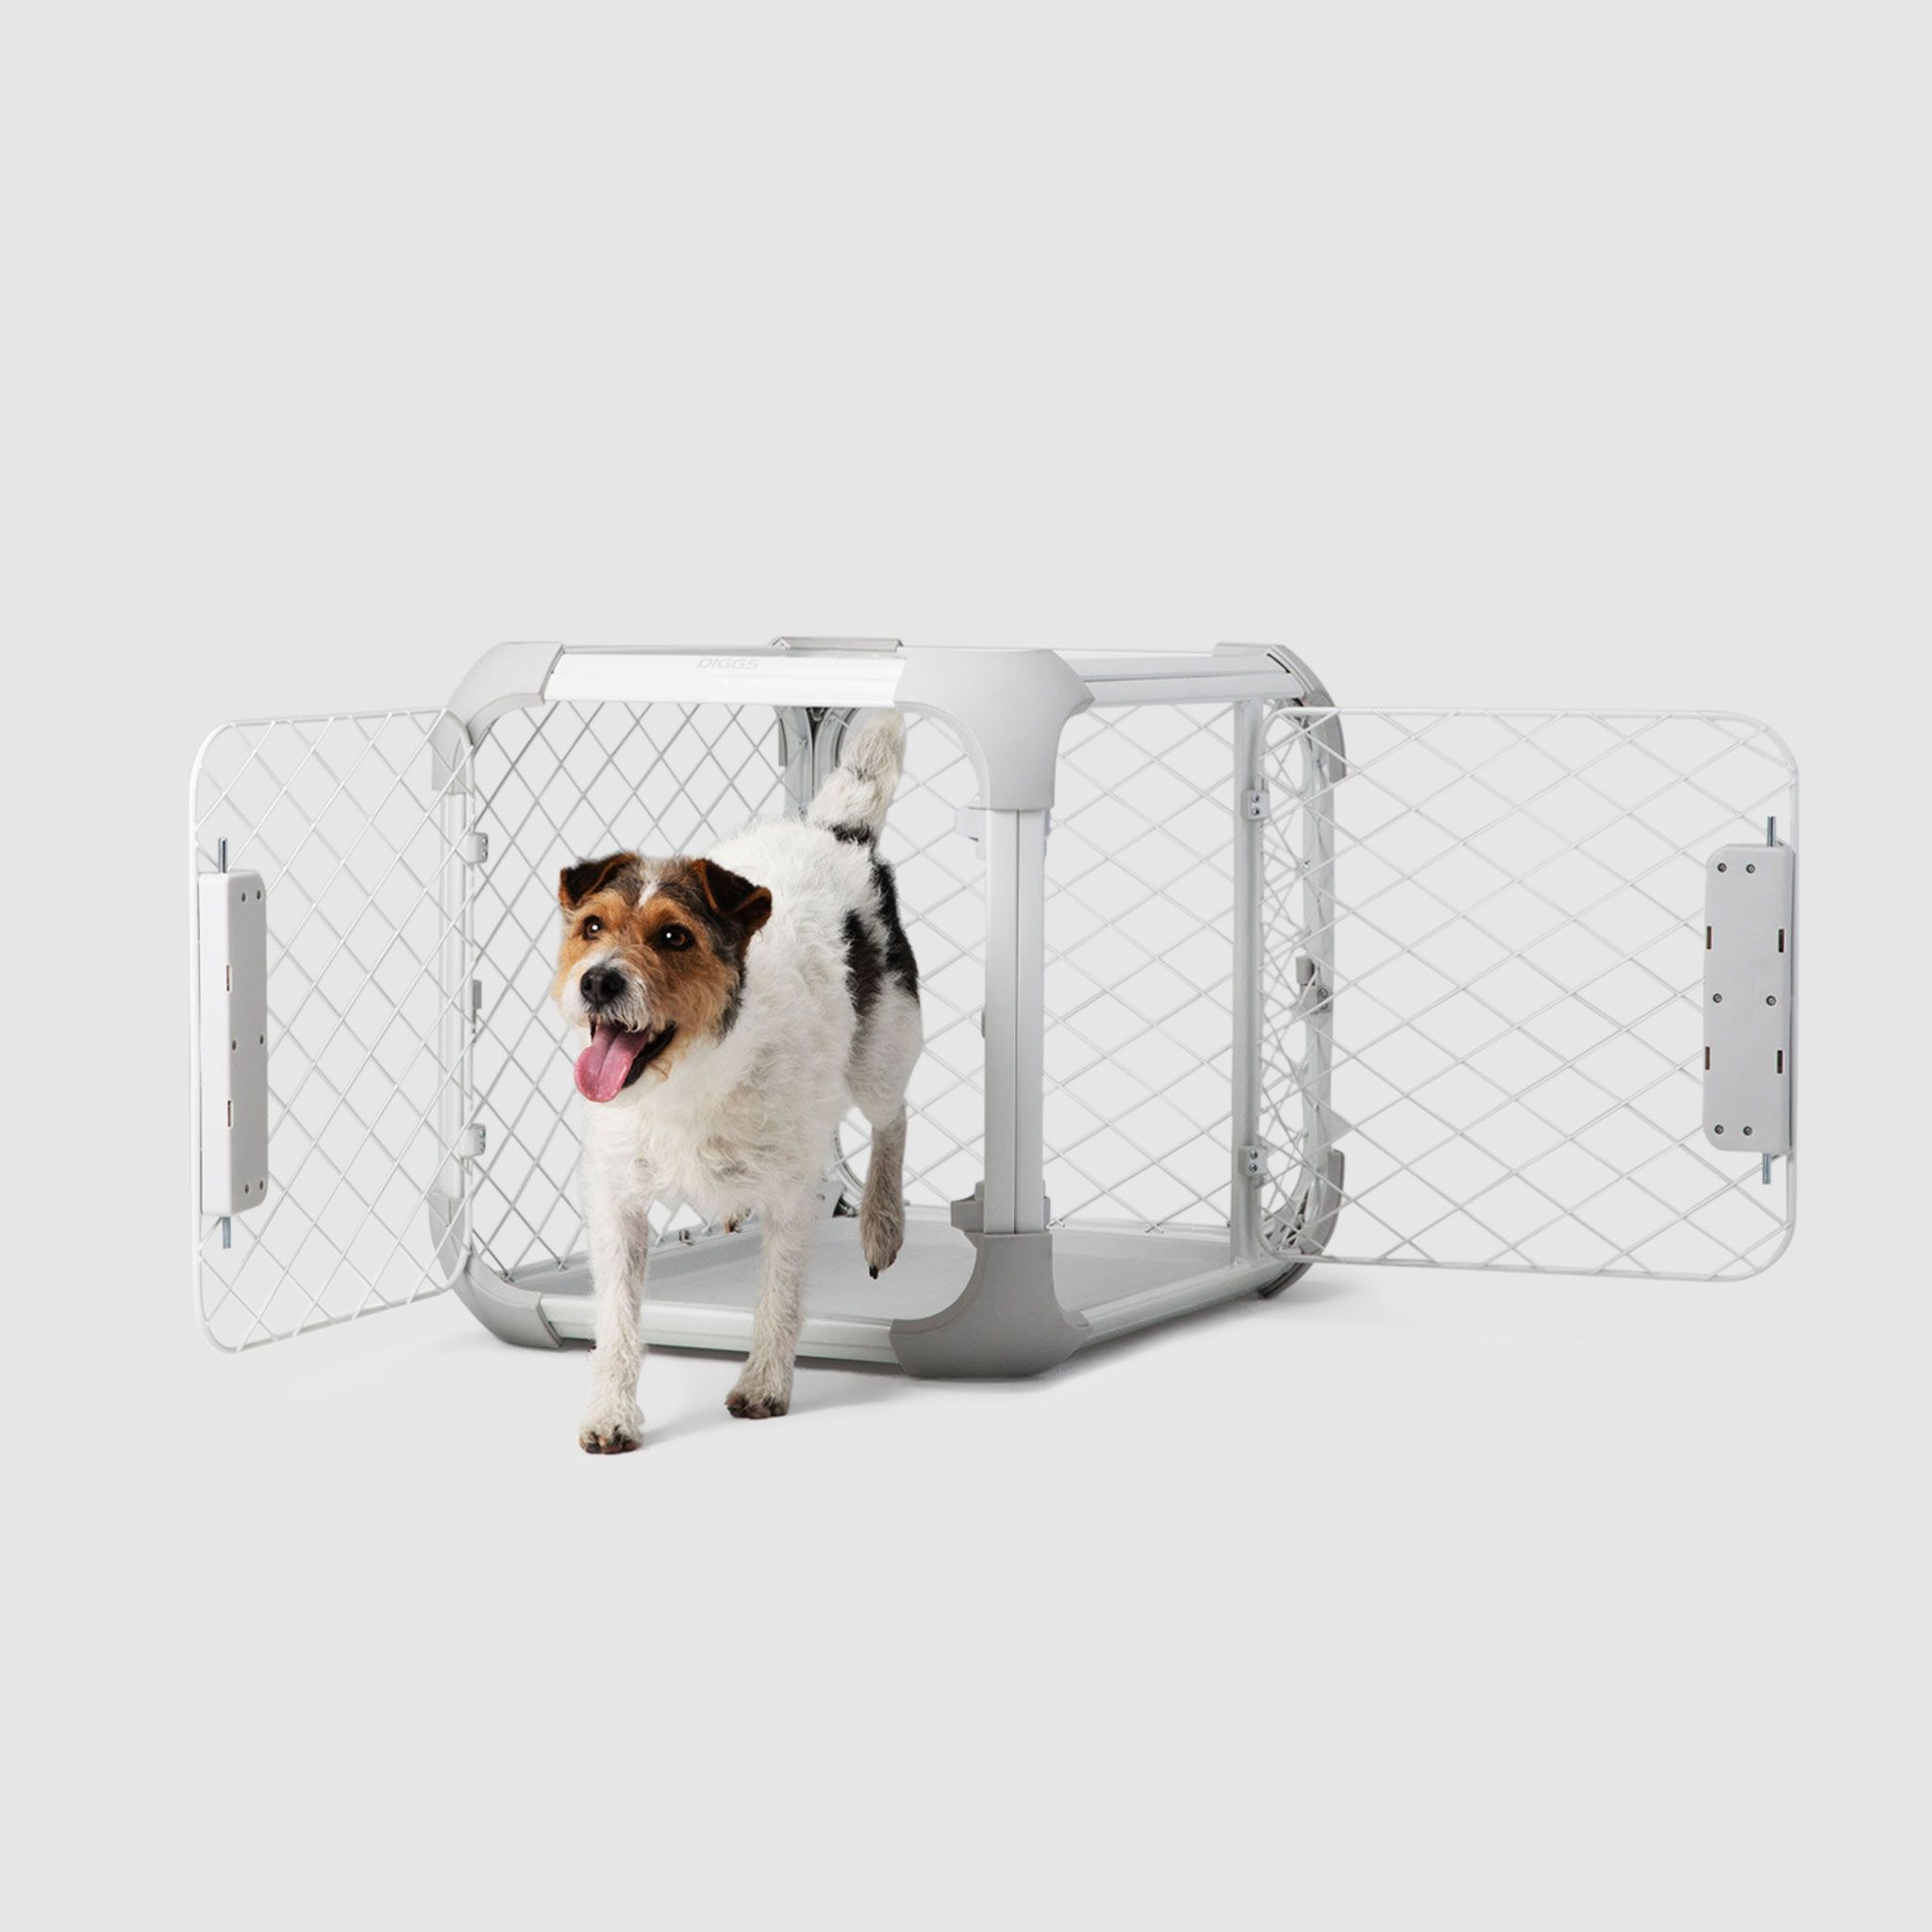 A dog standing in an open crate